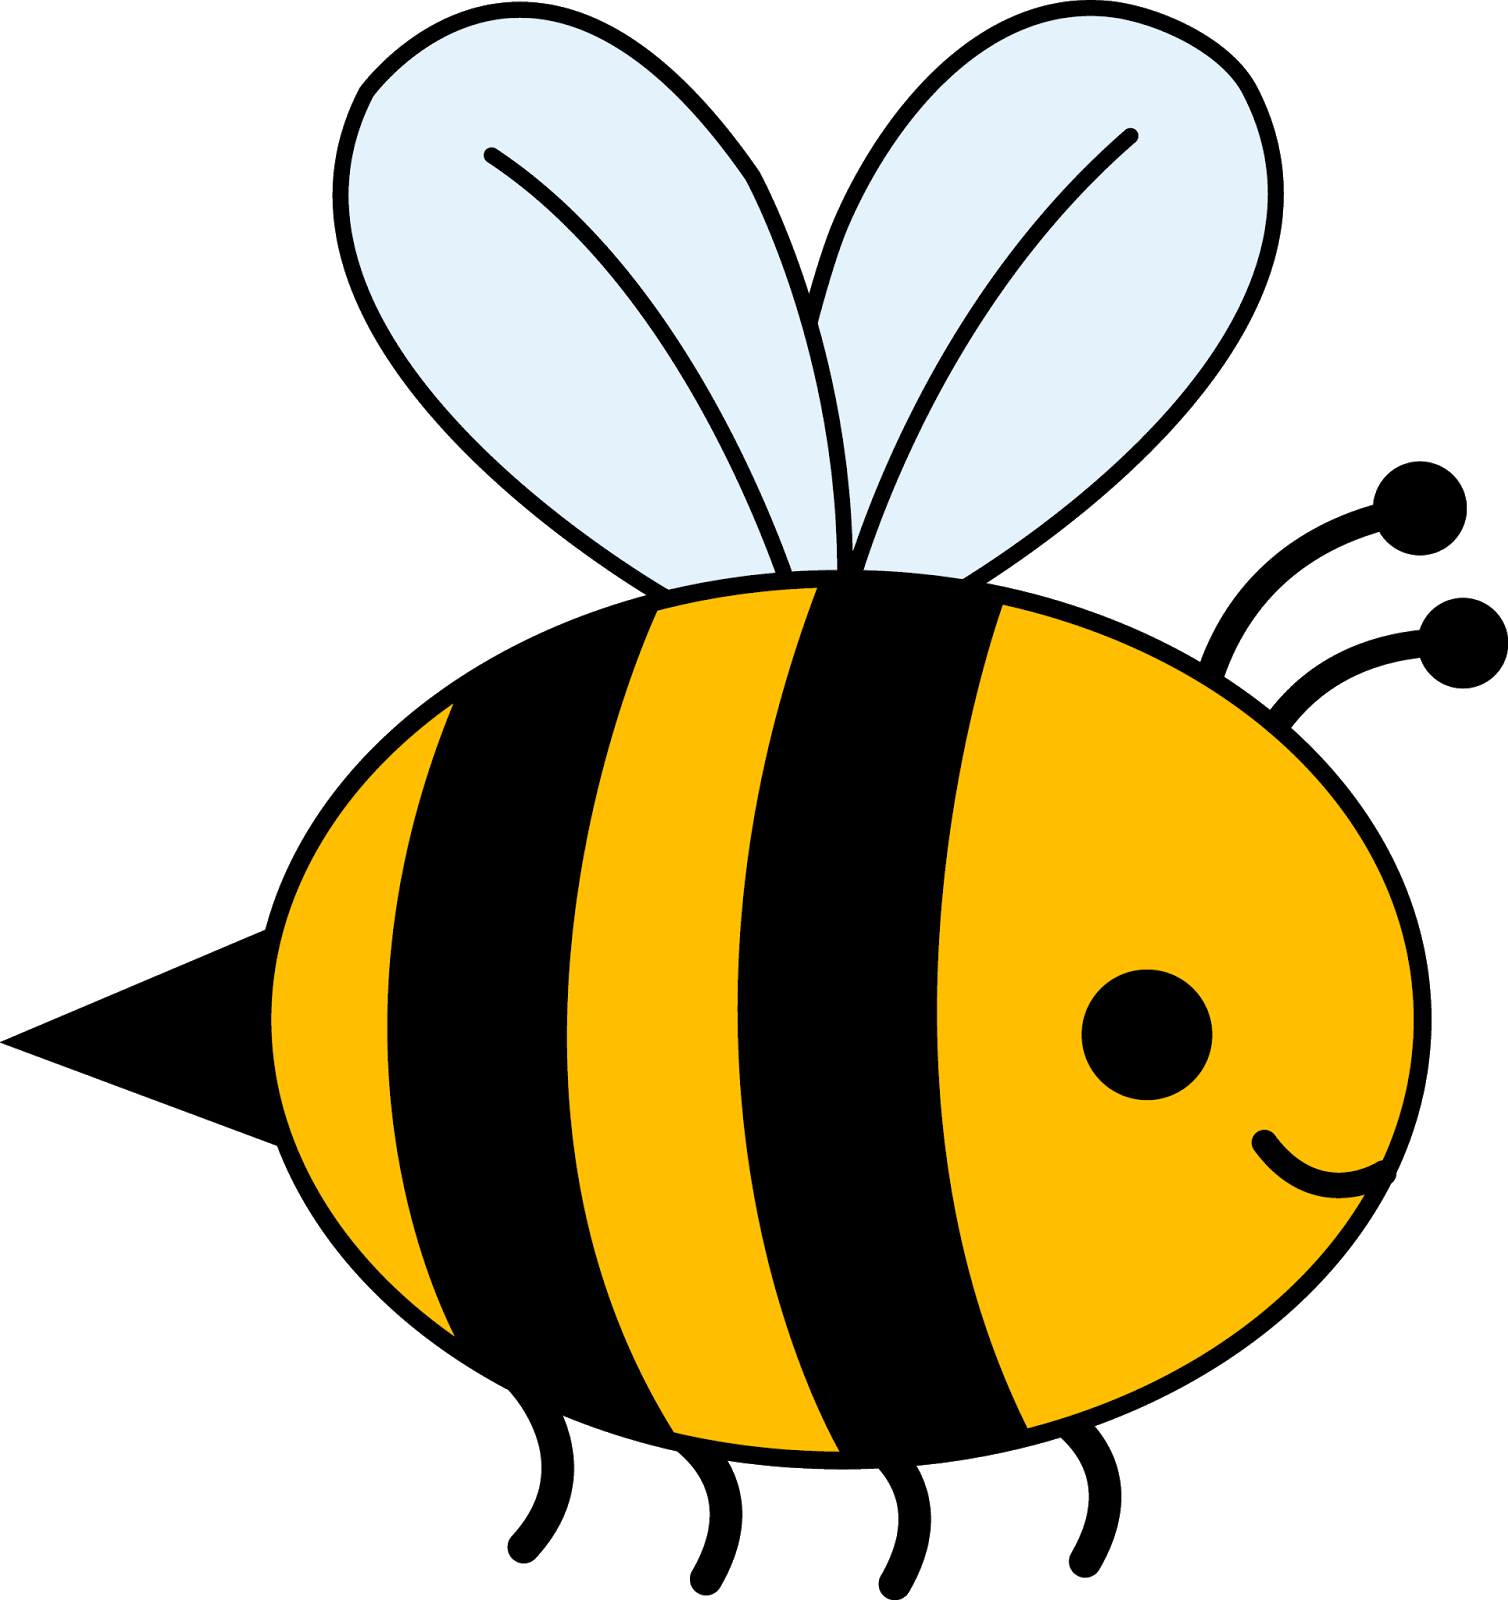 Spelling bee clipart black an